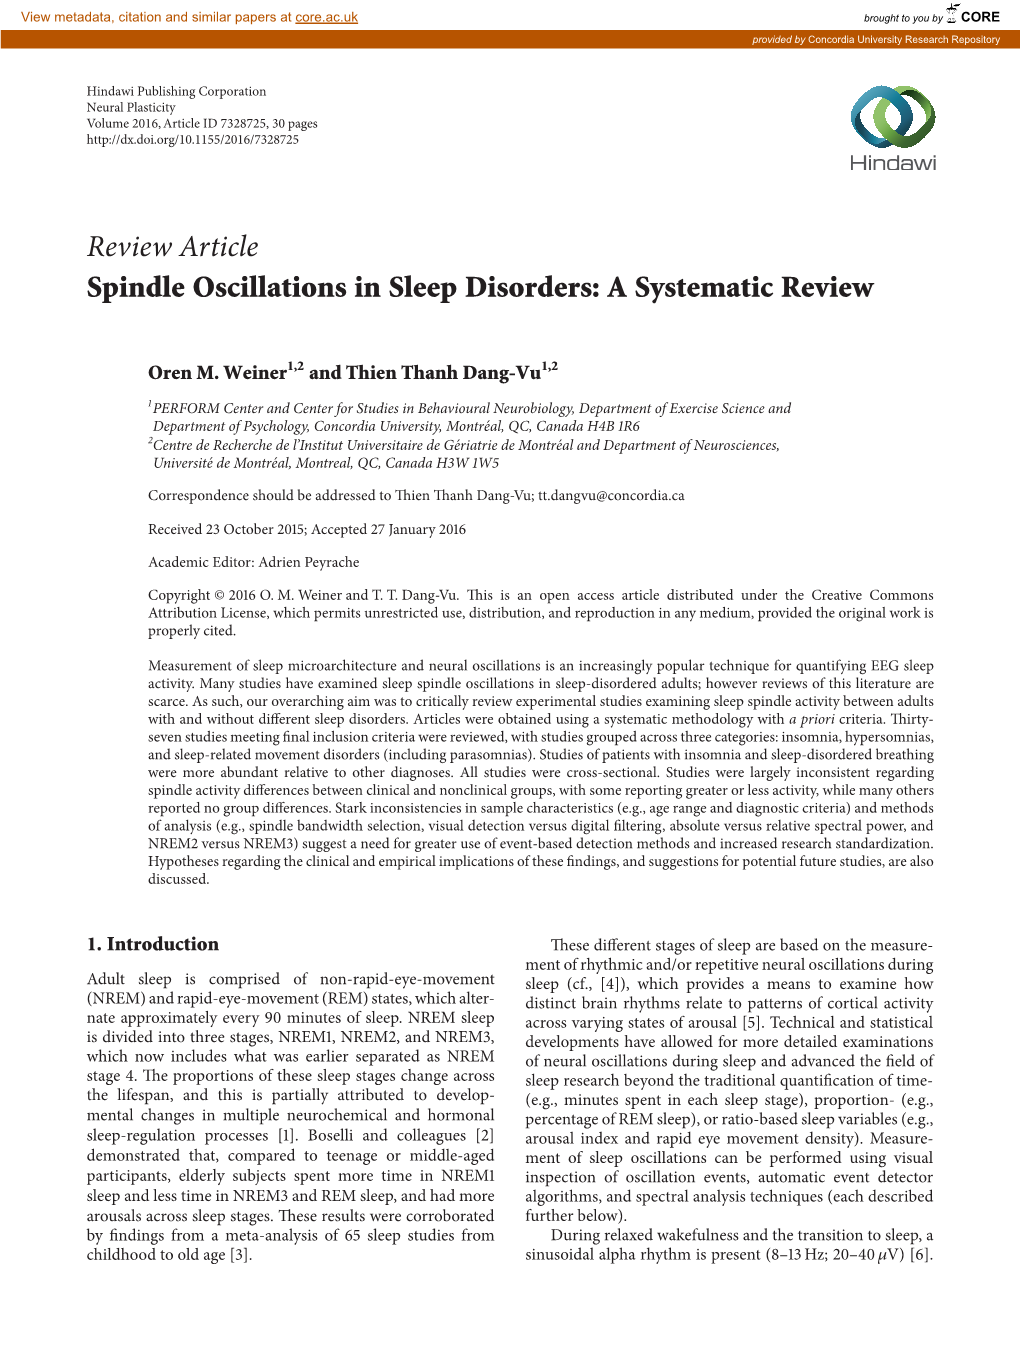 Review Article Spindle Oscillations in Sleep Disorders: a Systematic Review